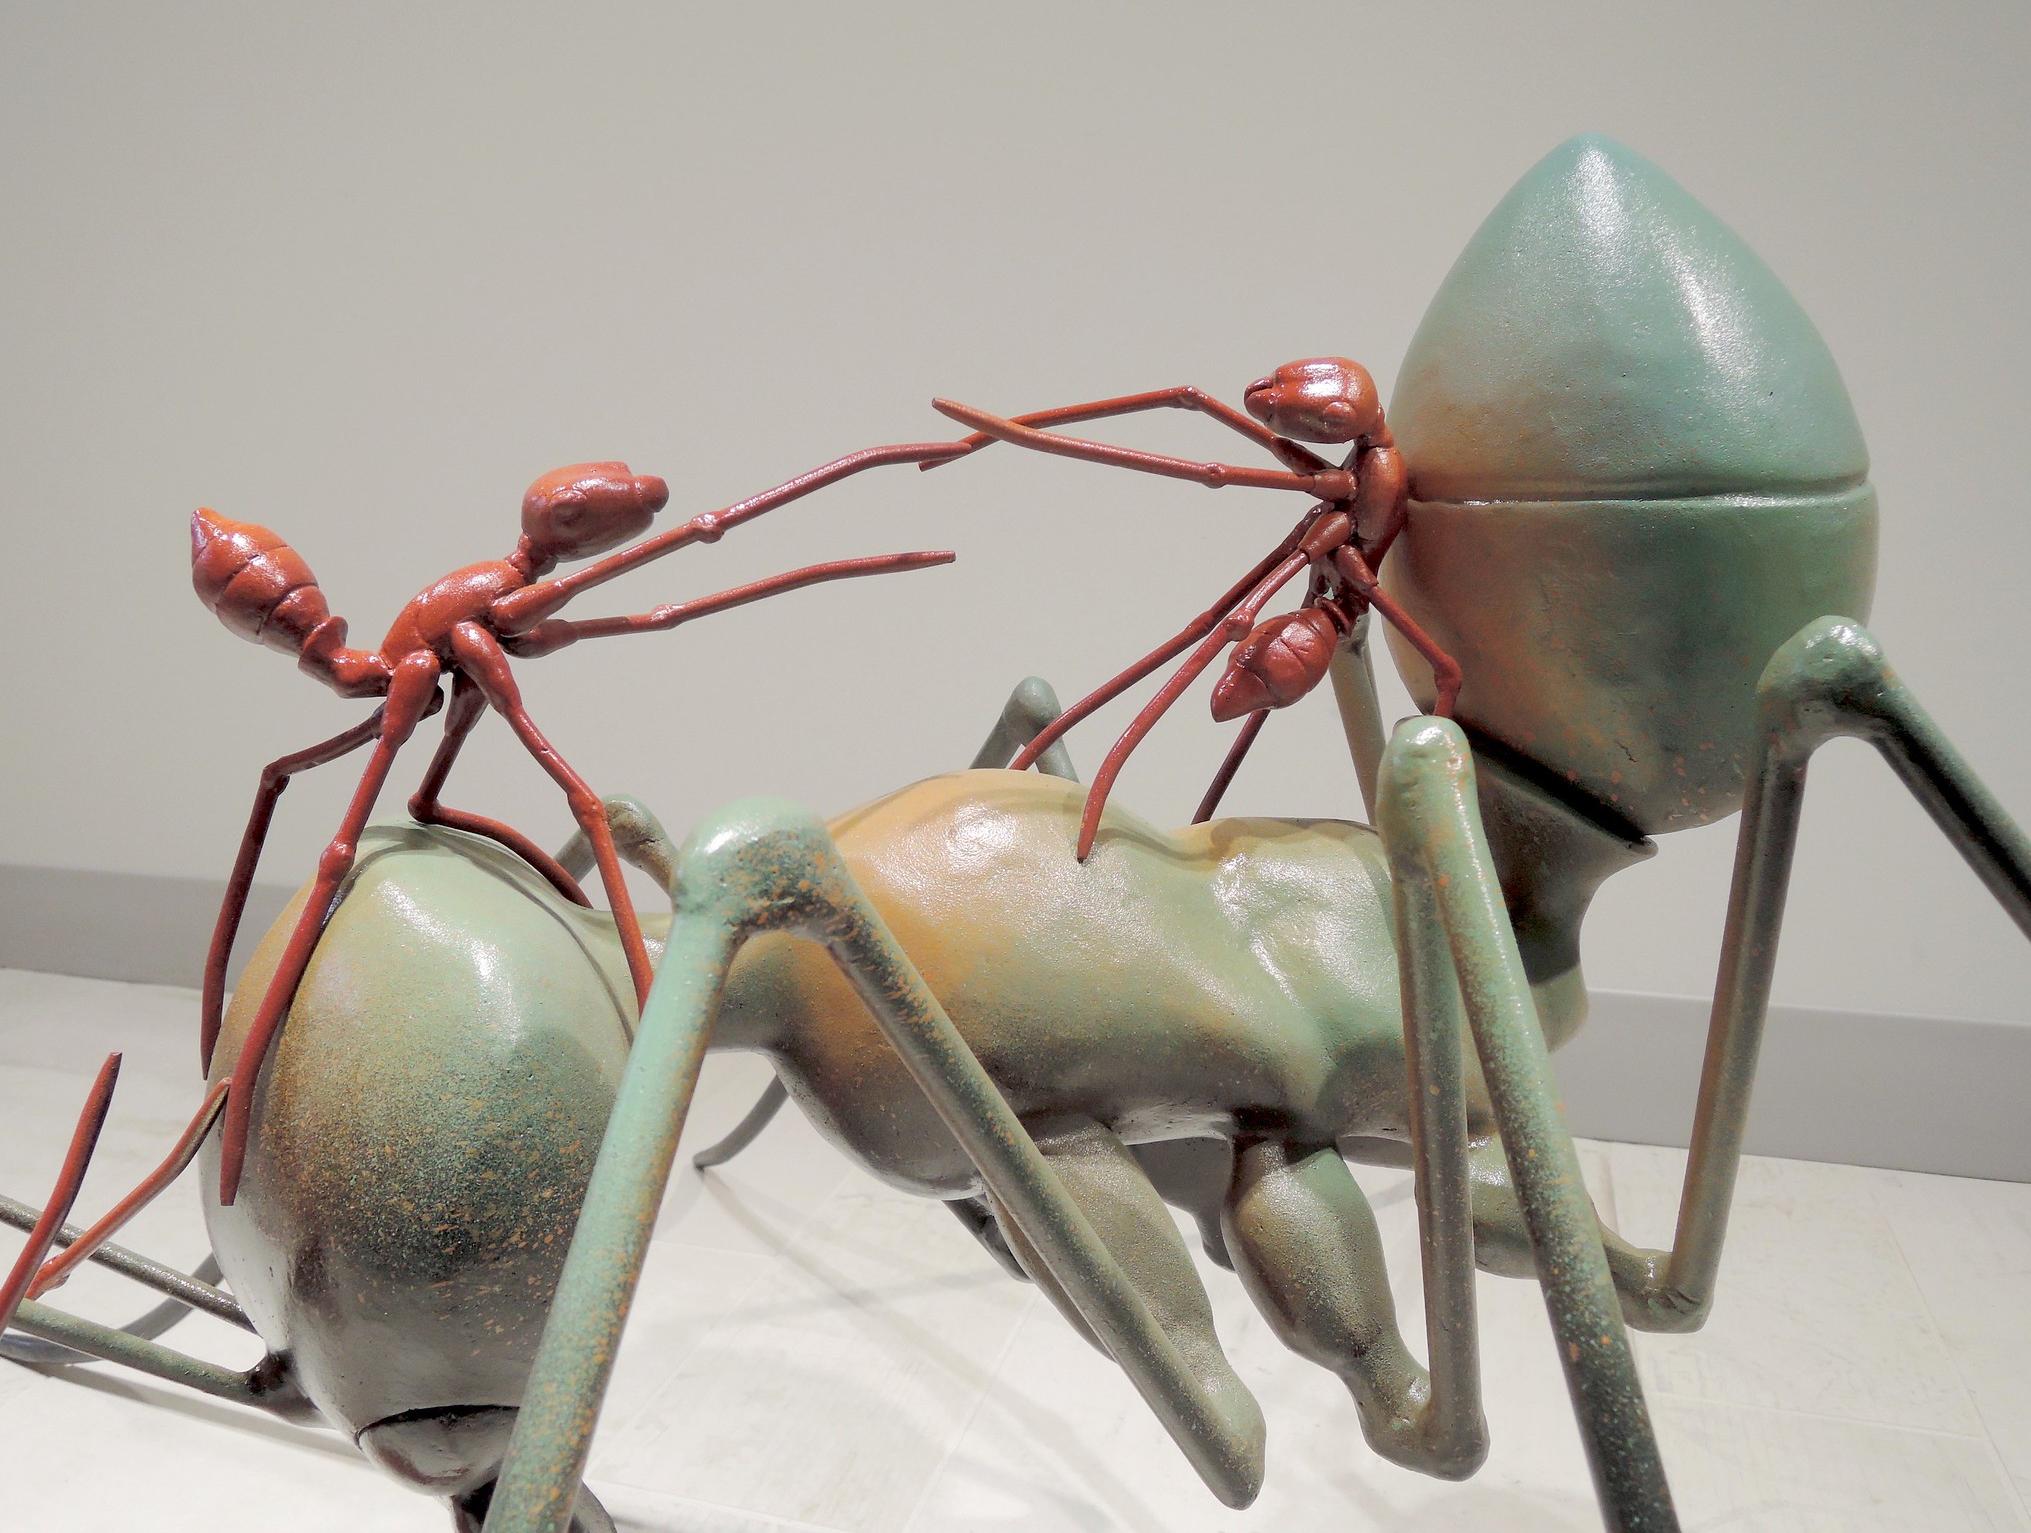 Sculpture of an ant